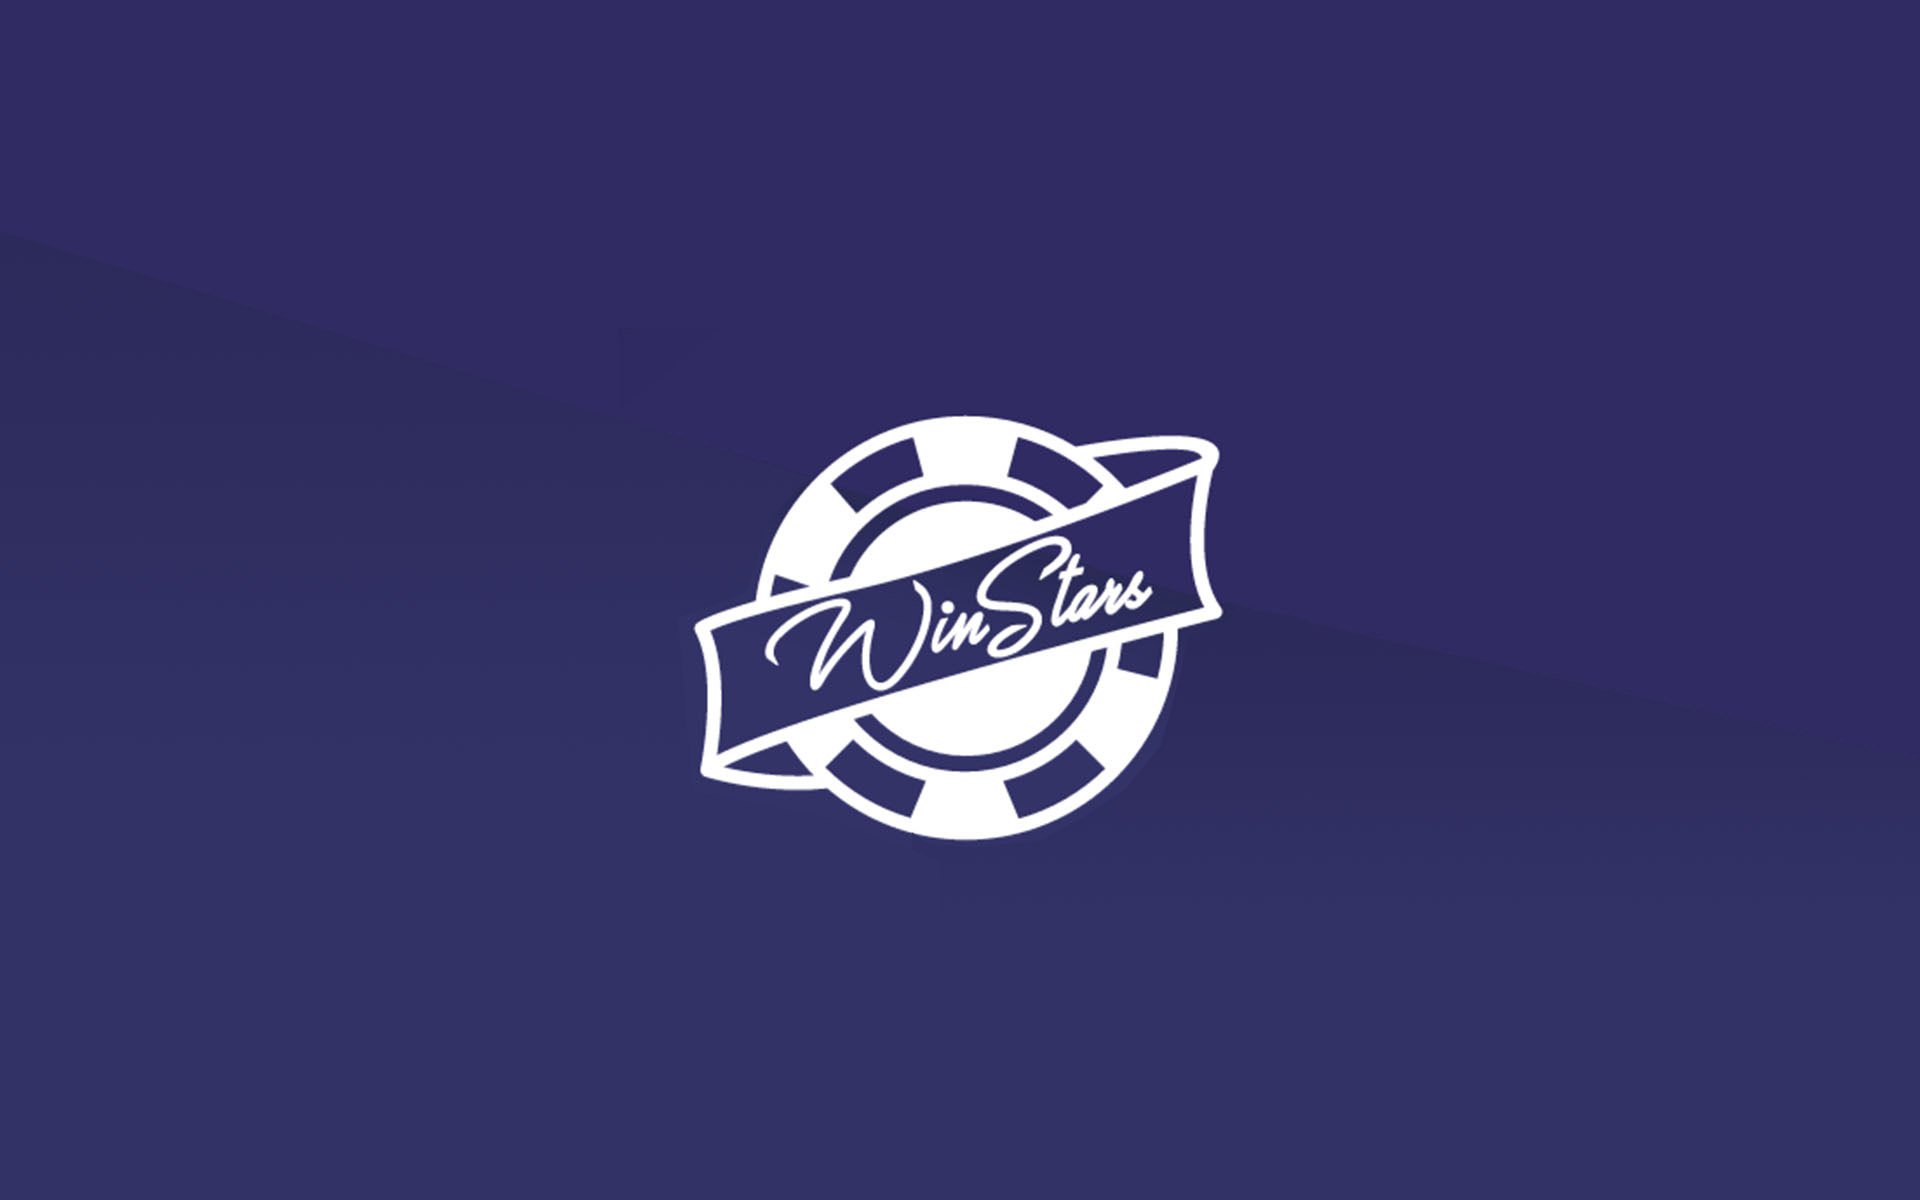 Winstars Is Ready to Change the Face of Gambling